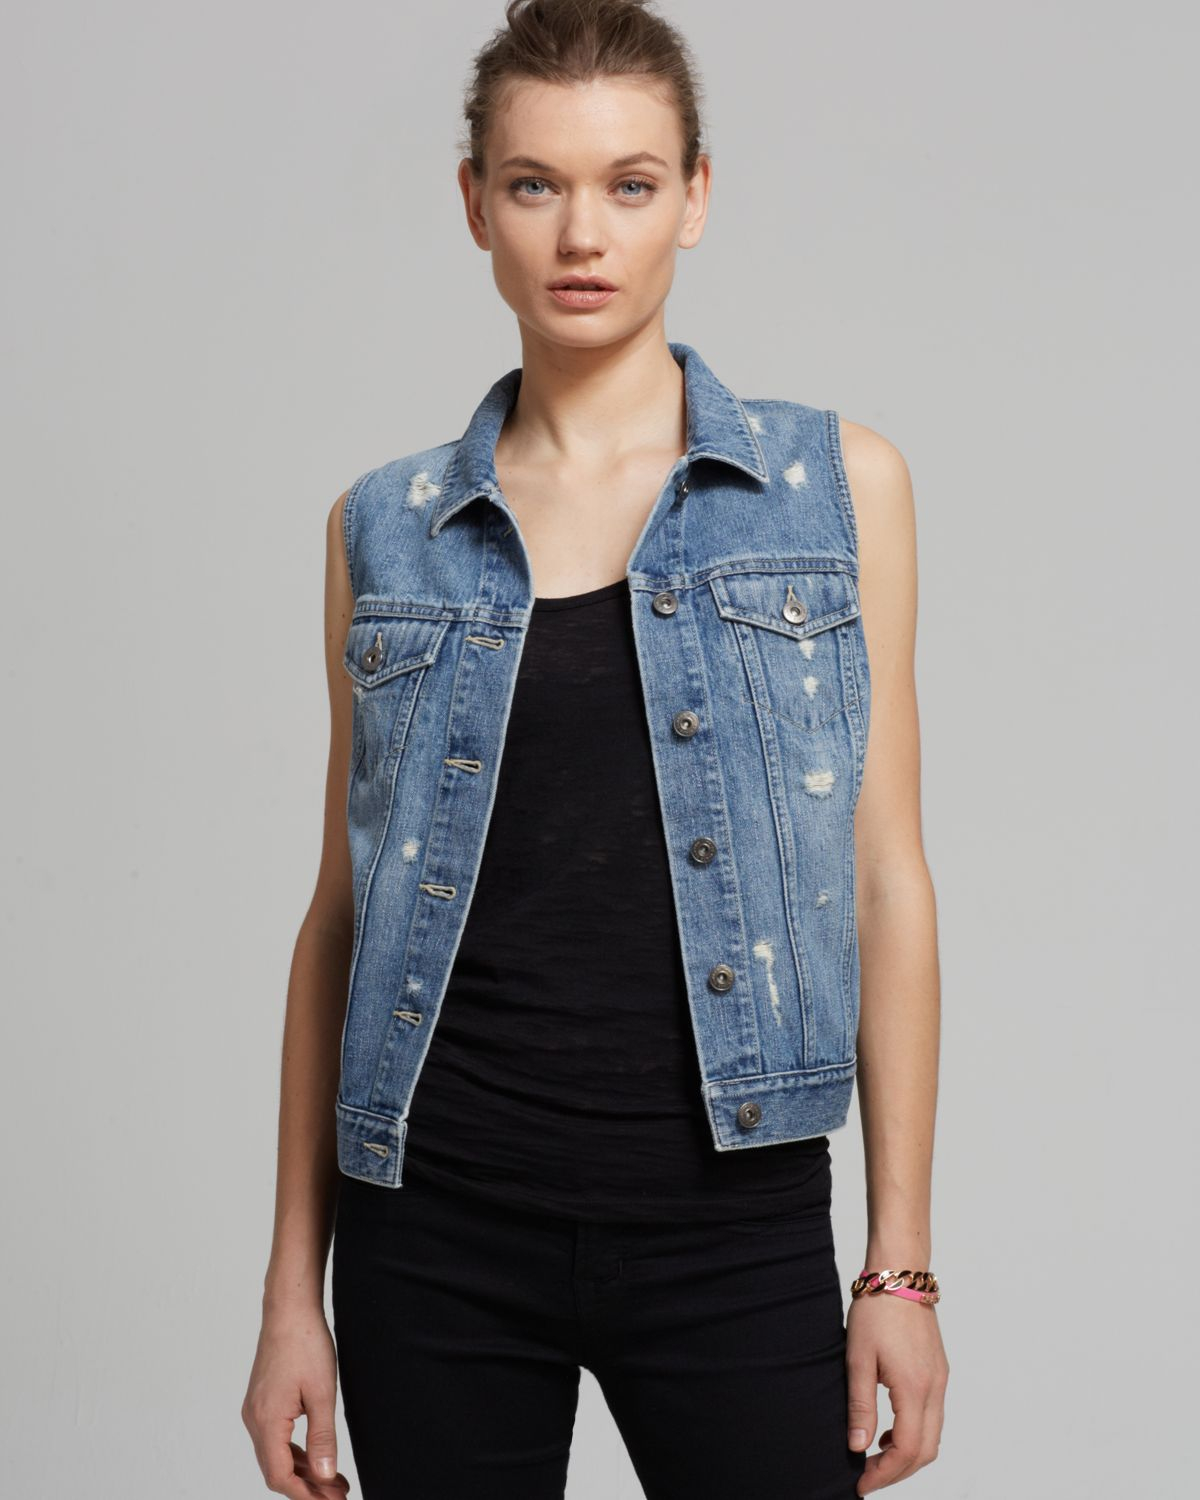 Lyst - Two By Vince Camuto Destroyed Denim Vest in Blue